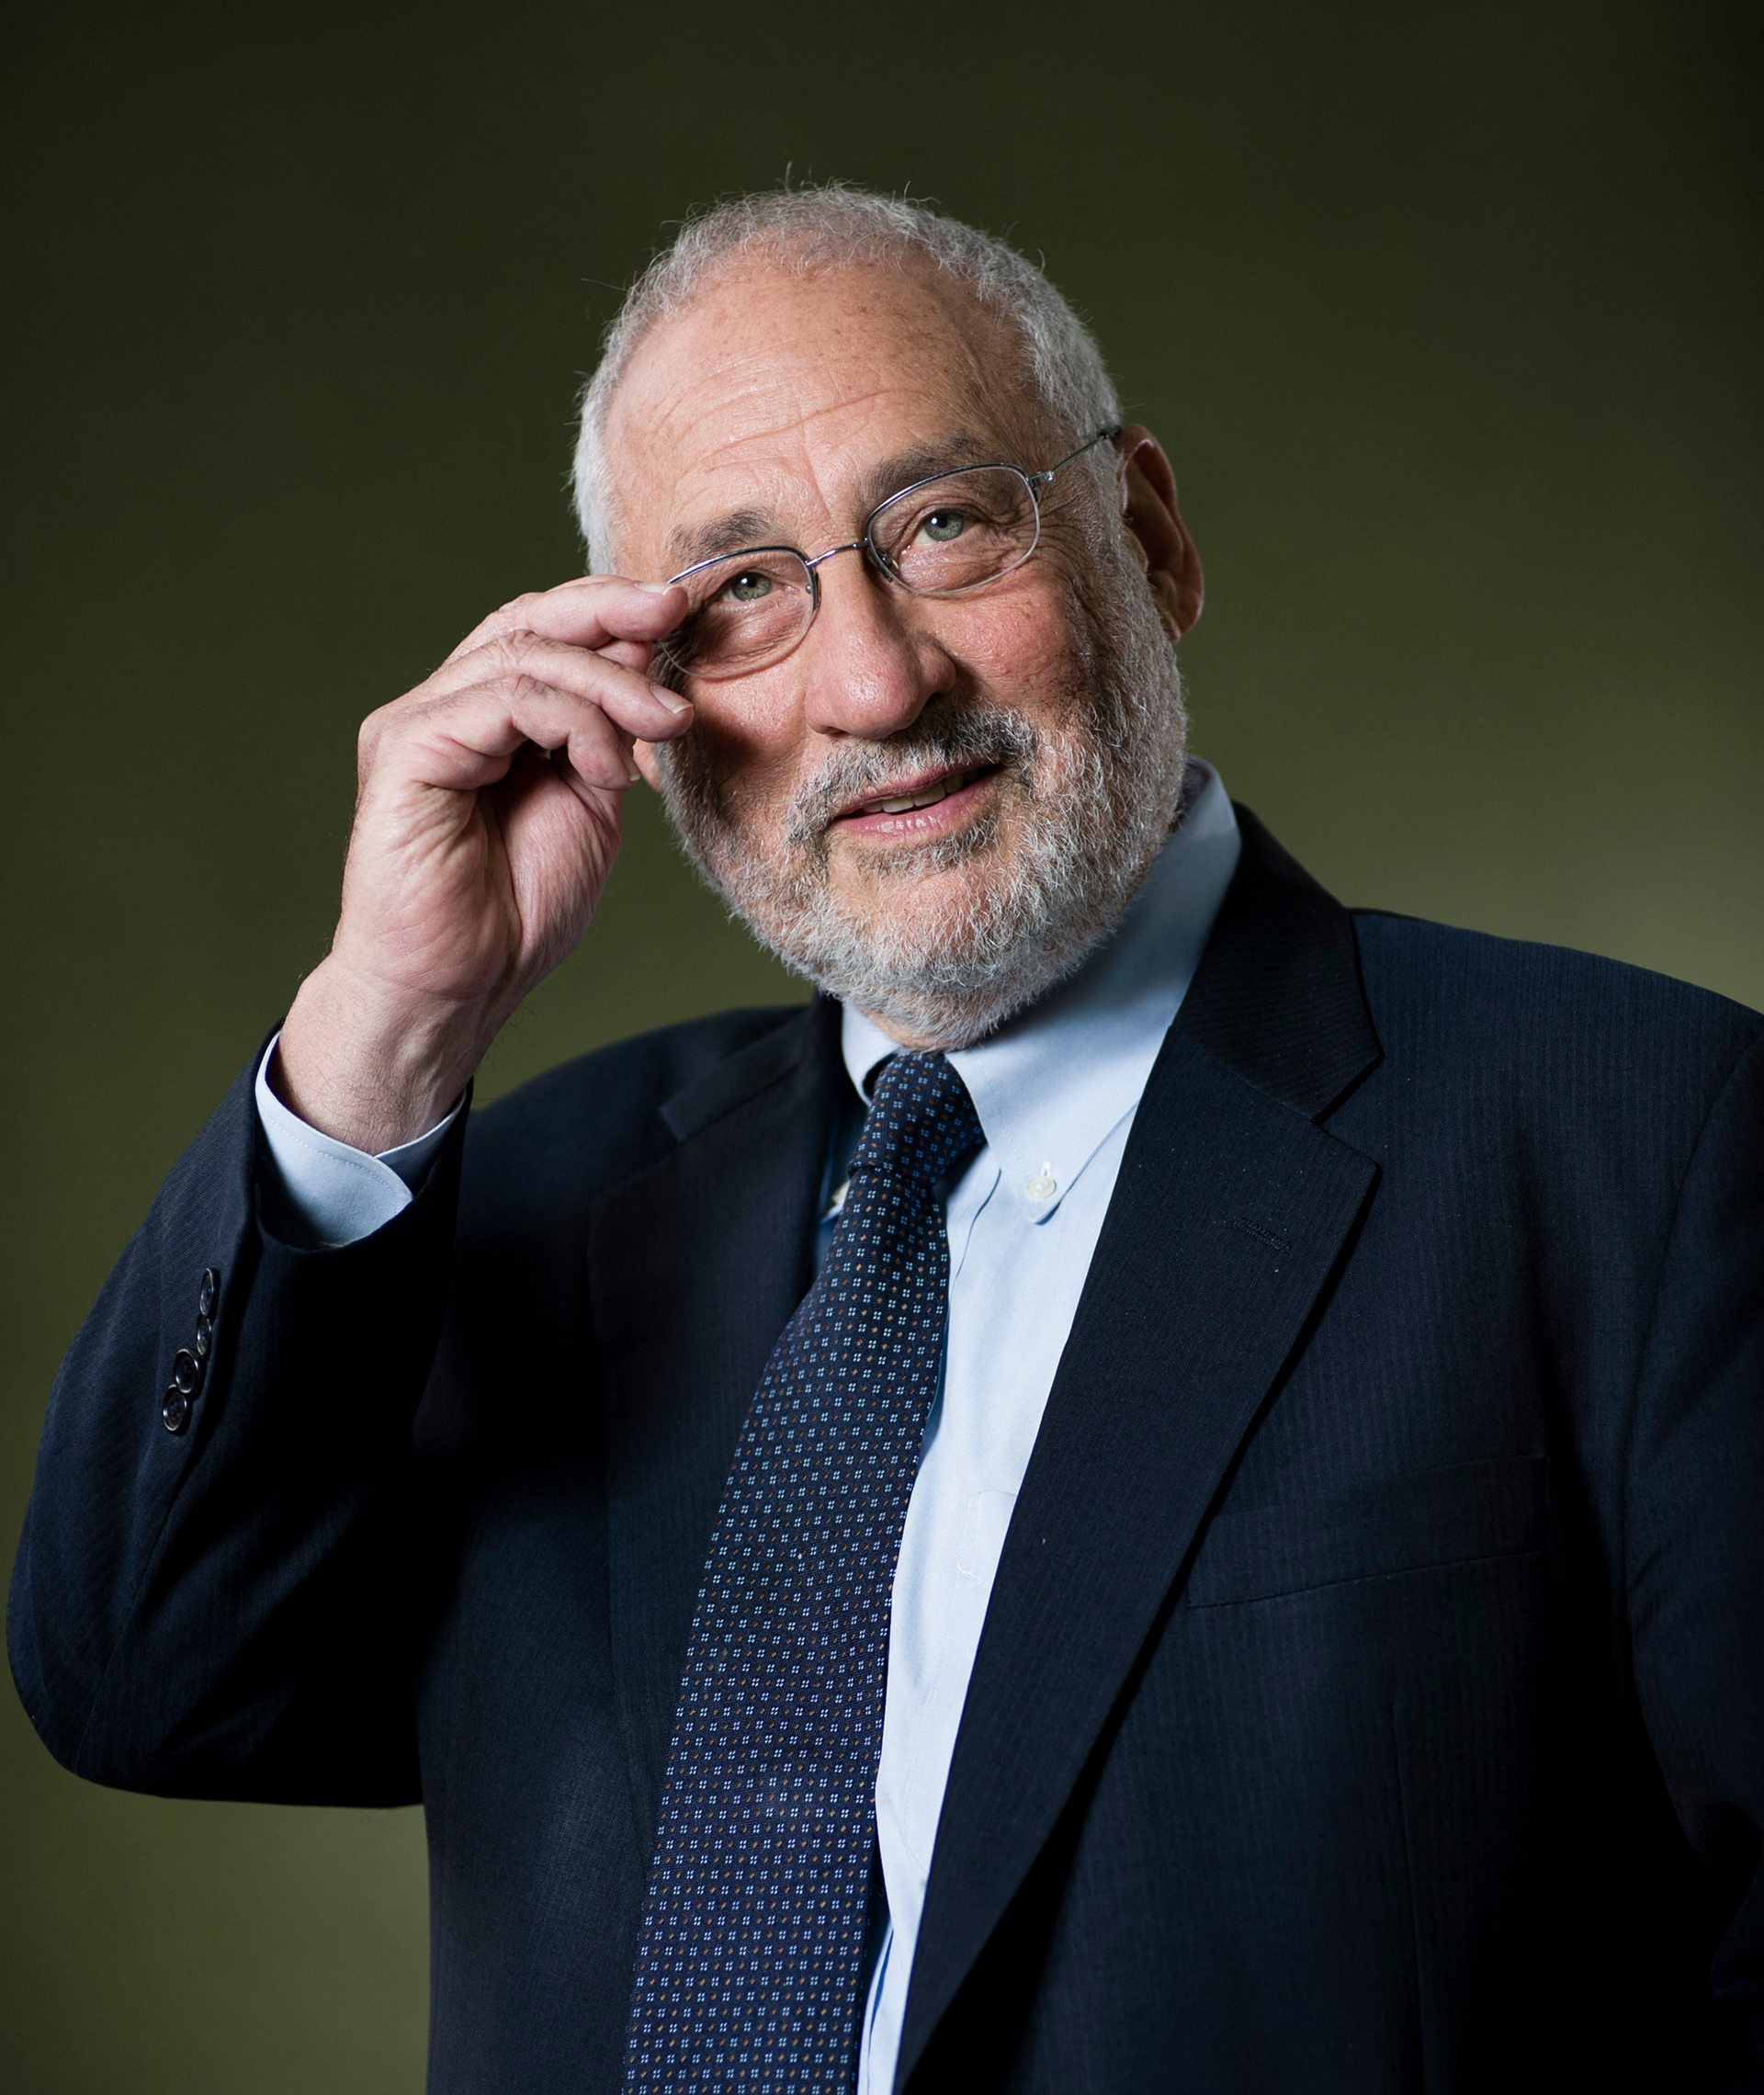 Joseph Stiglitz: "The war in Ukraine shows that our priority should be transition